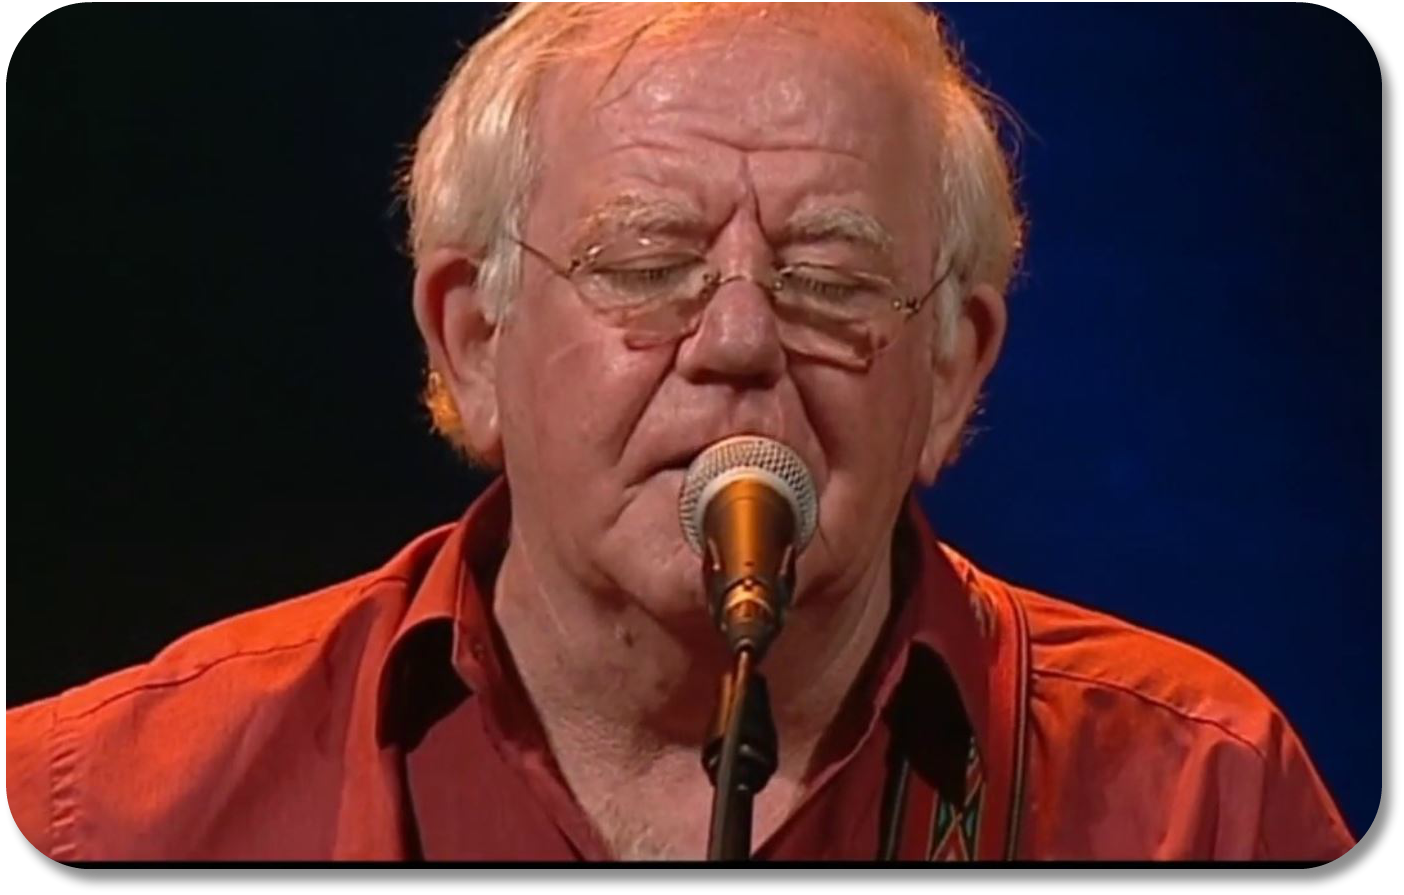 Irish Expressions - Paddy Reilly sings Fields of Athenry via YouTube.